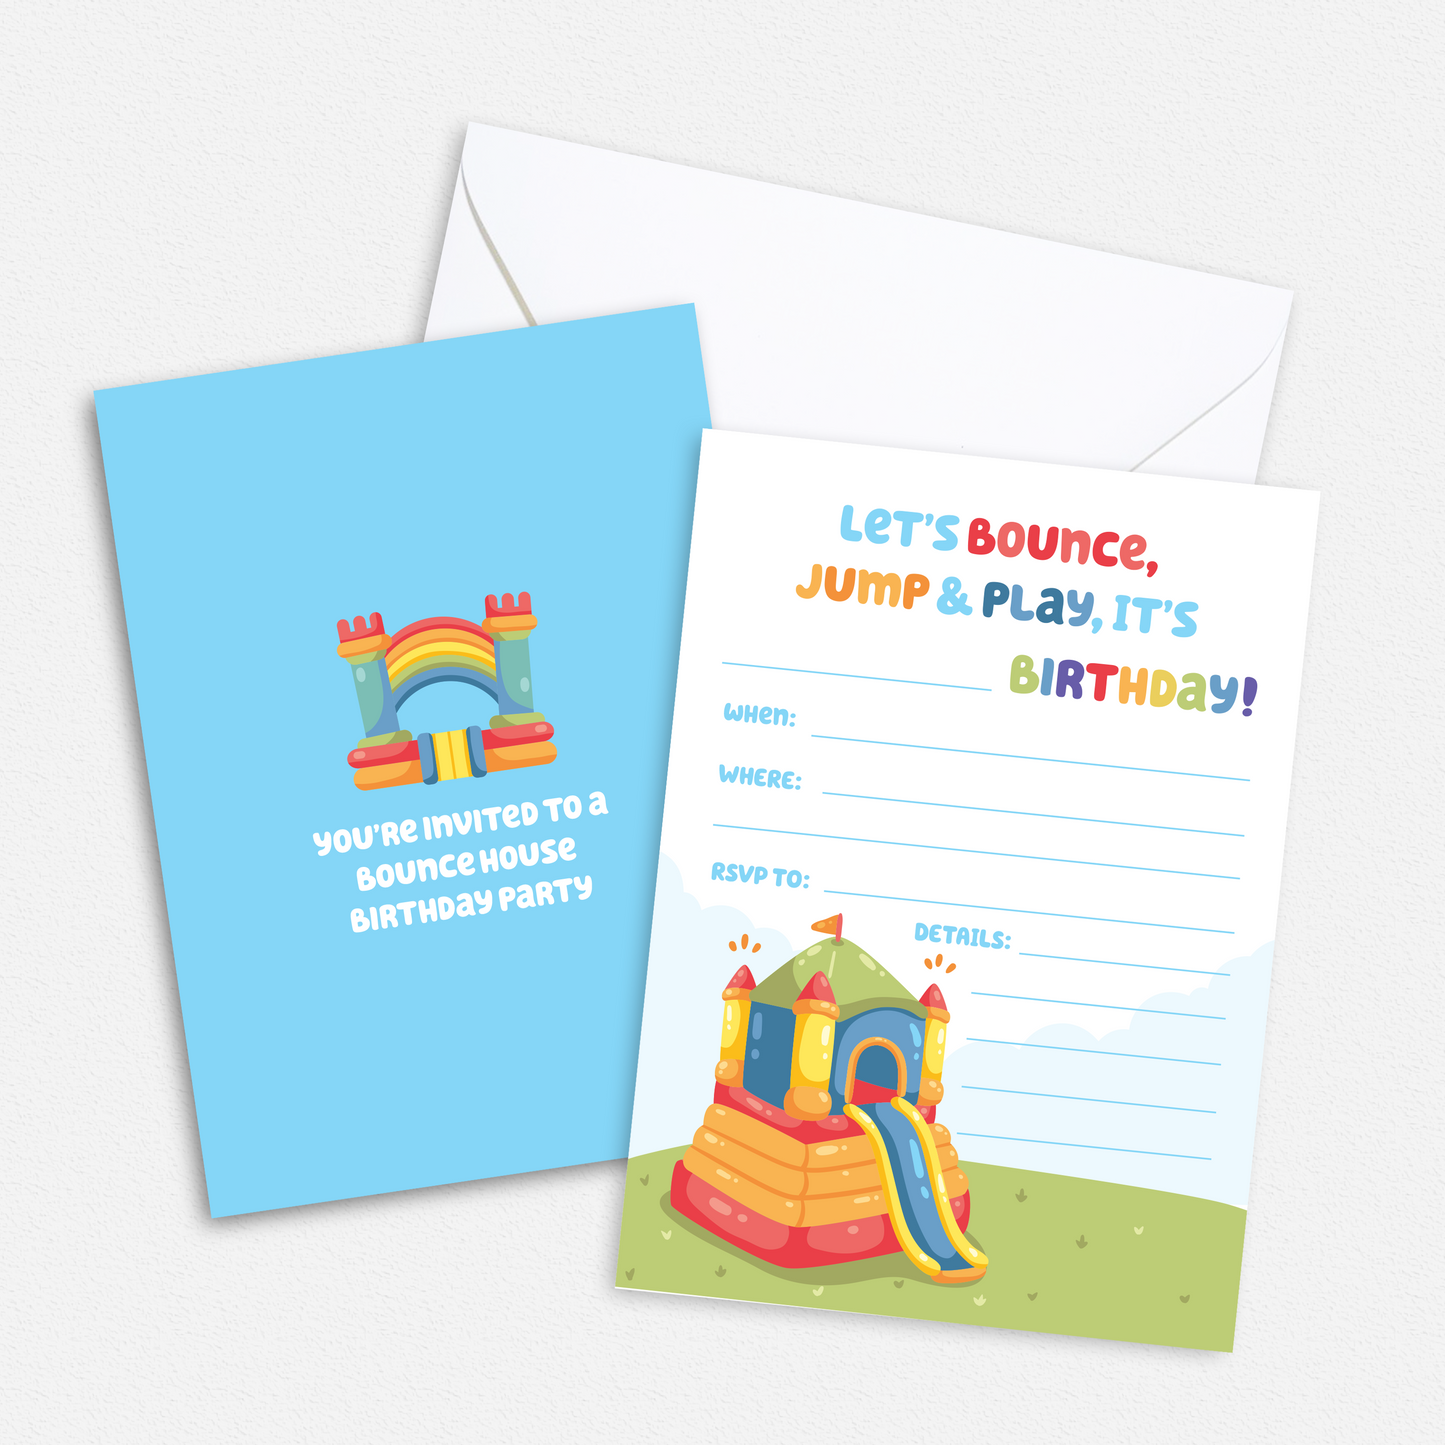 Bounce House Birthday Party Invitation -  Custom OR Fill-in-the-Blank - Set of 12